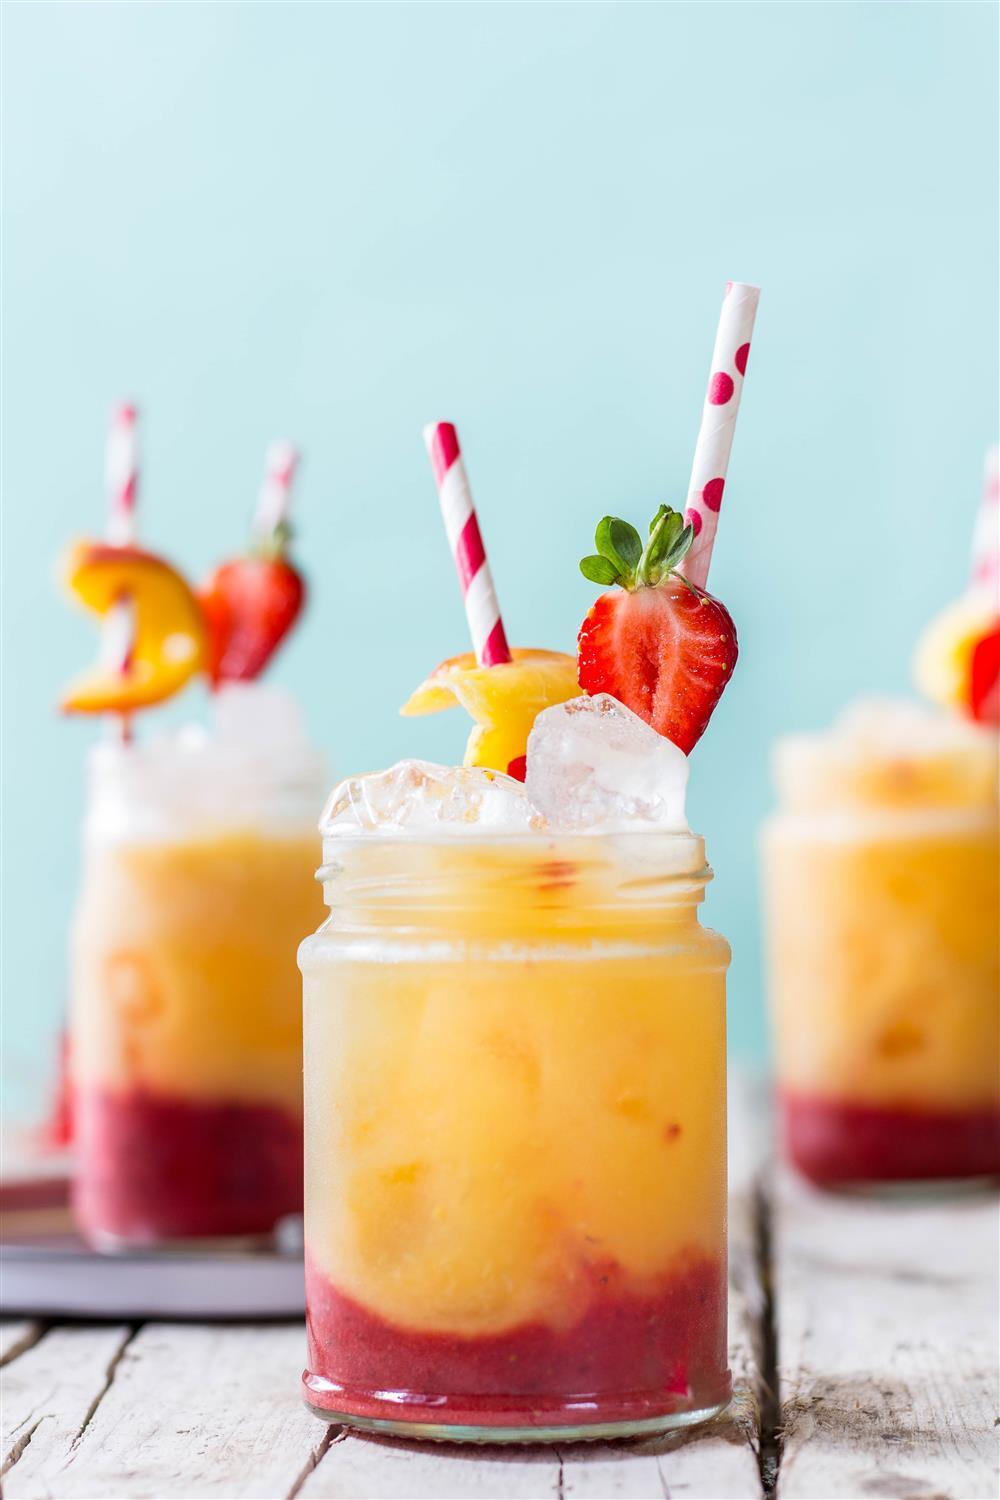 Delightful spring mocktail - roasted peach and strawberry fizz with no added sugar. Click to find the whole recipe or pin and save for later!